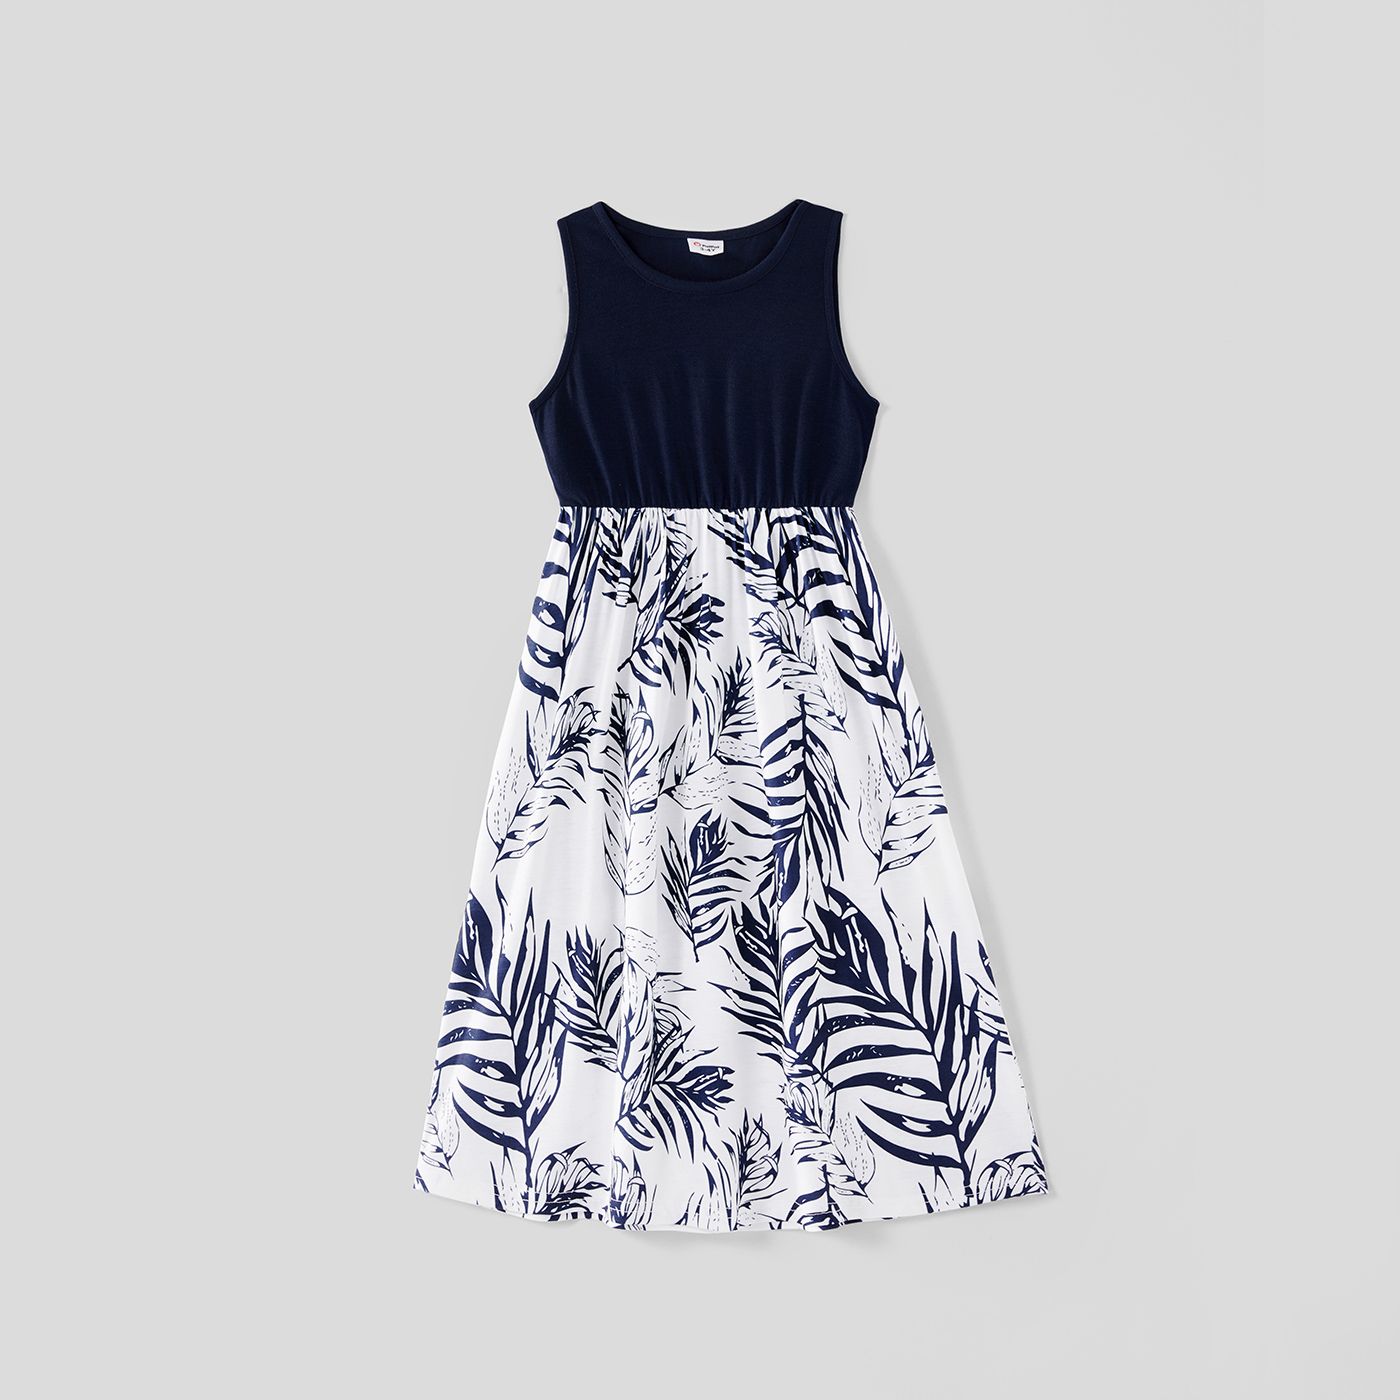 Family Matching Solid Splicing Plant Print Sleeveless Midi Dresses And Short-sleeve T-shirts Sets